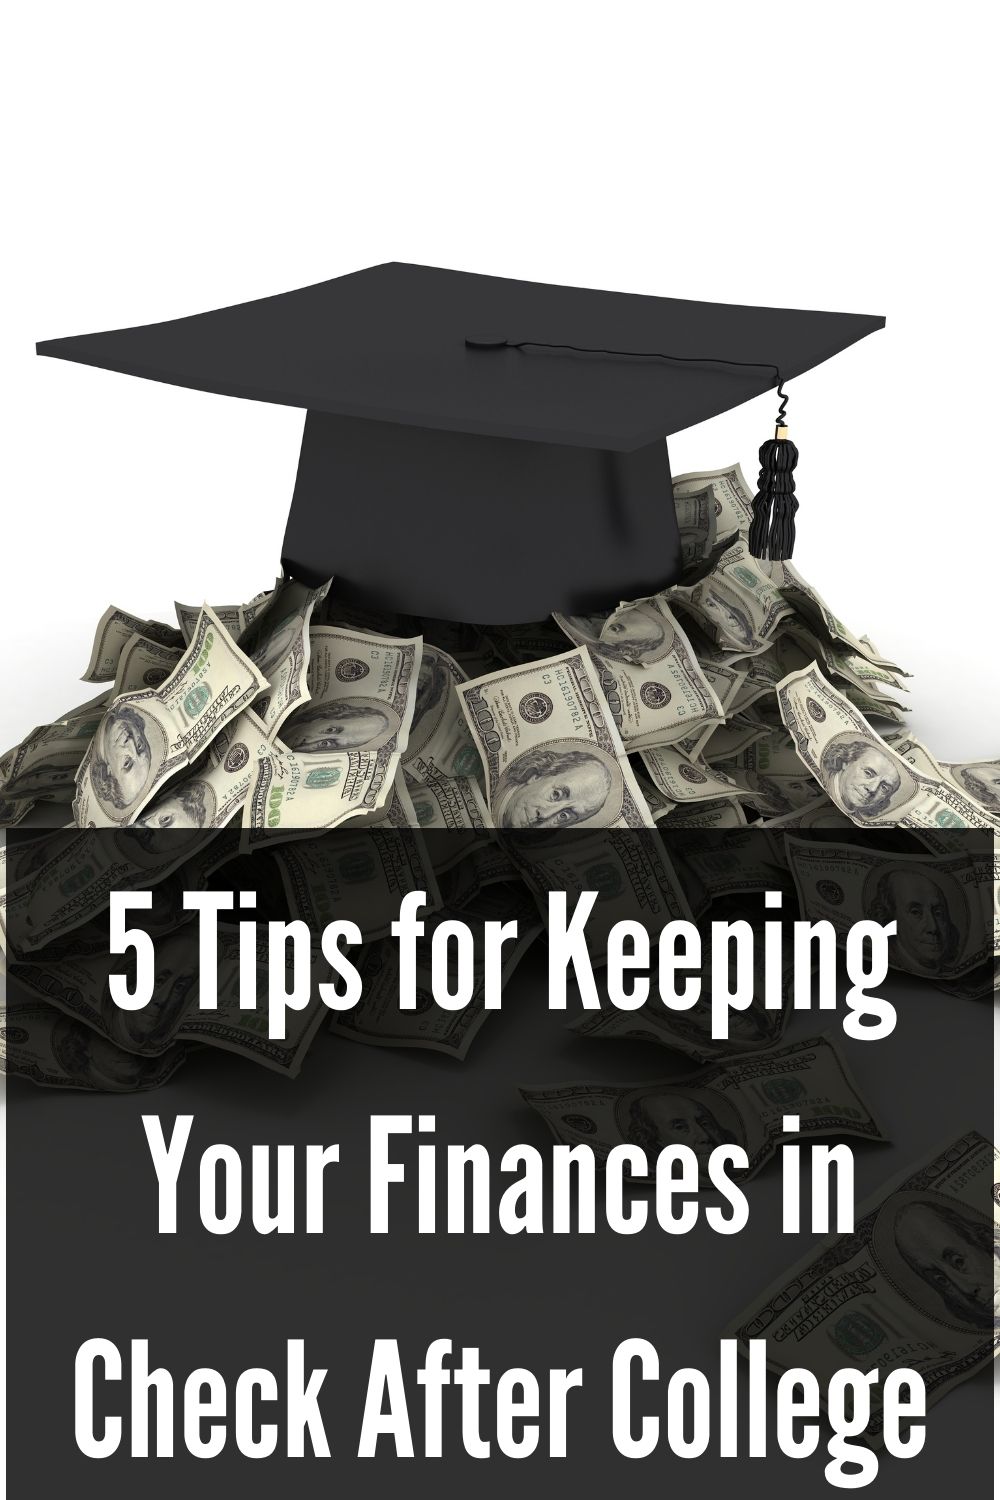 Graduation hat sitting on top of a pile of one hundred dollar bills with text overlay of 5 tips for keeping your finances in check after college